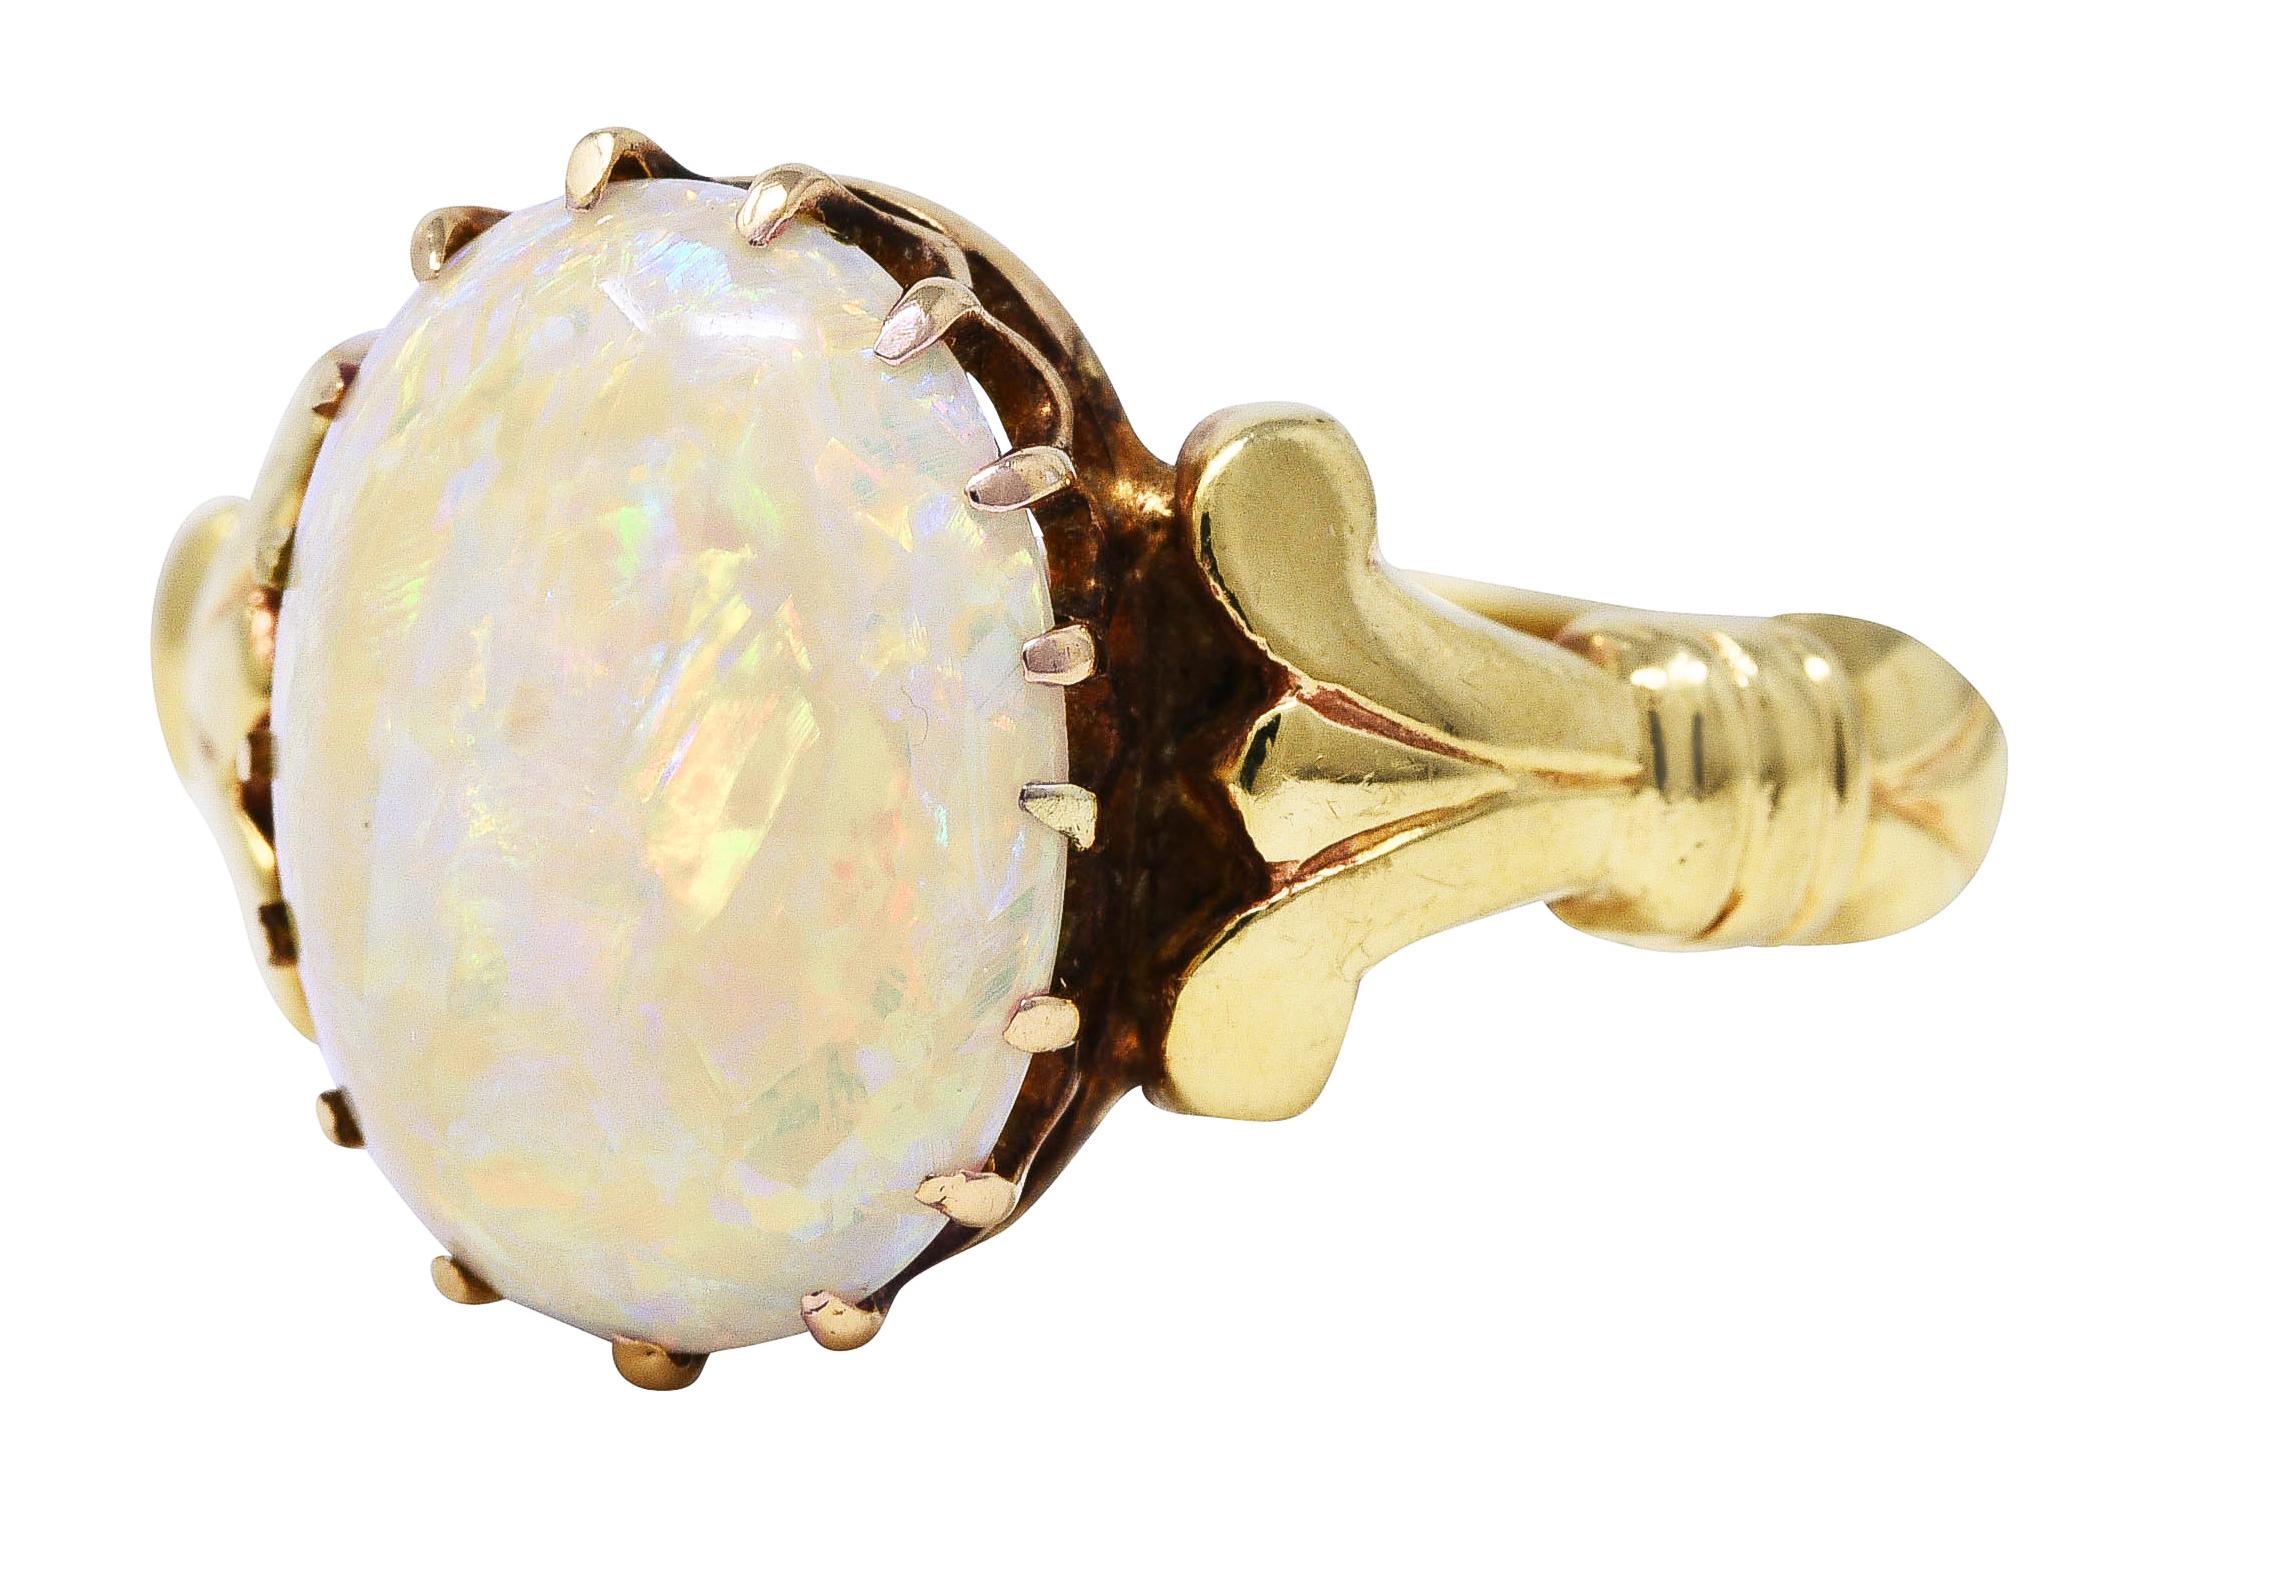 Ring centers a 12.0 x 9.0 mm oval opal cabochon - translucent white in body color with spectral play-of-color. Prong set in a scalloped gallery and flanked by grooved lotus motif shoulders with fluted accents. Tested as 14 karat gold. Circa: 1880's.